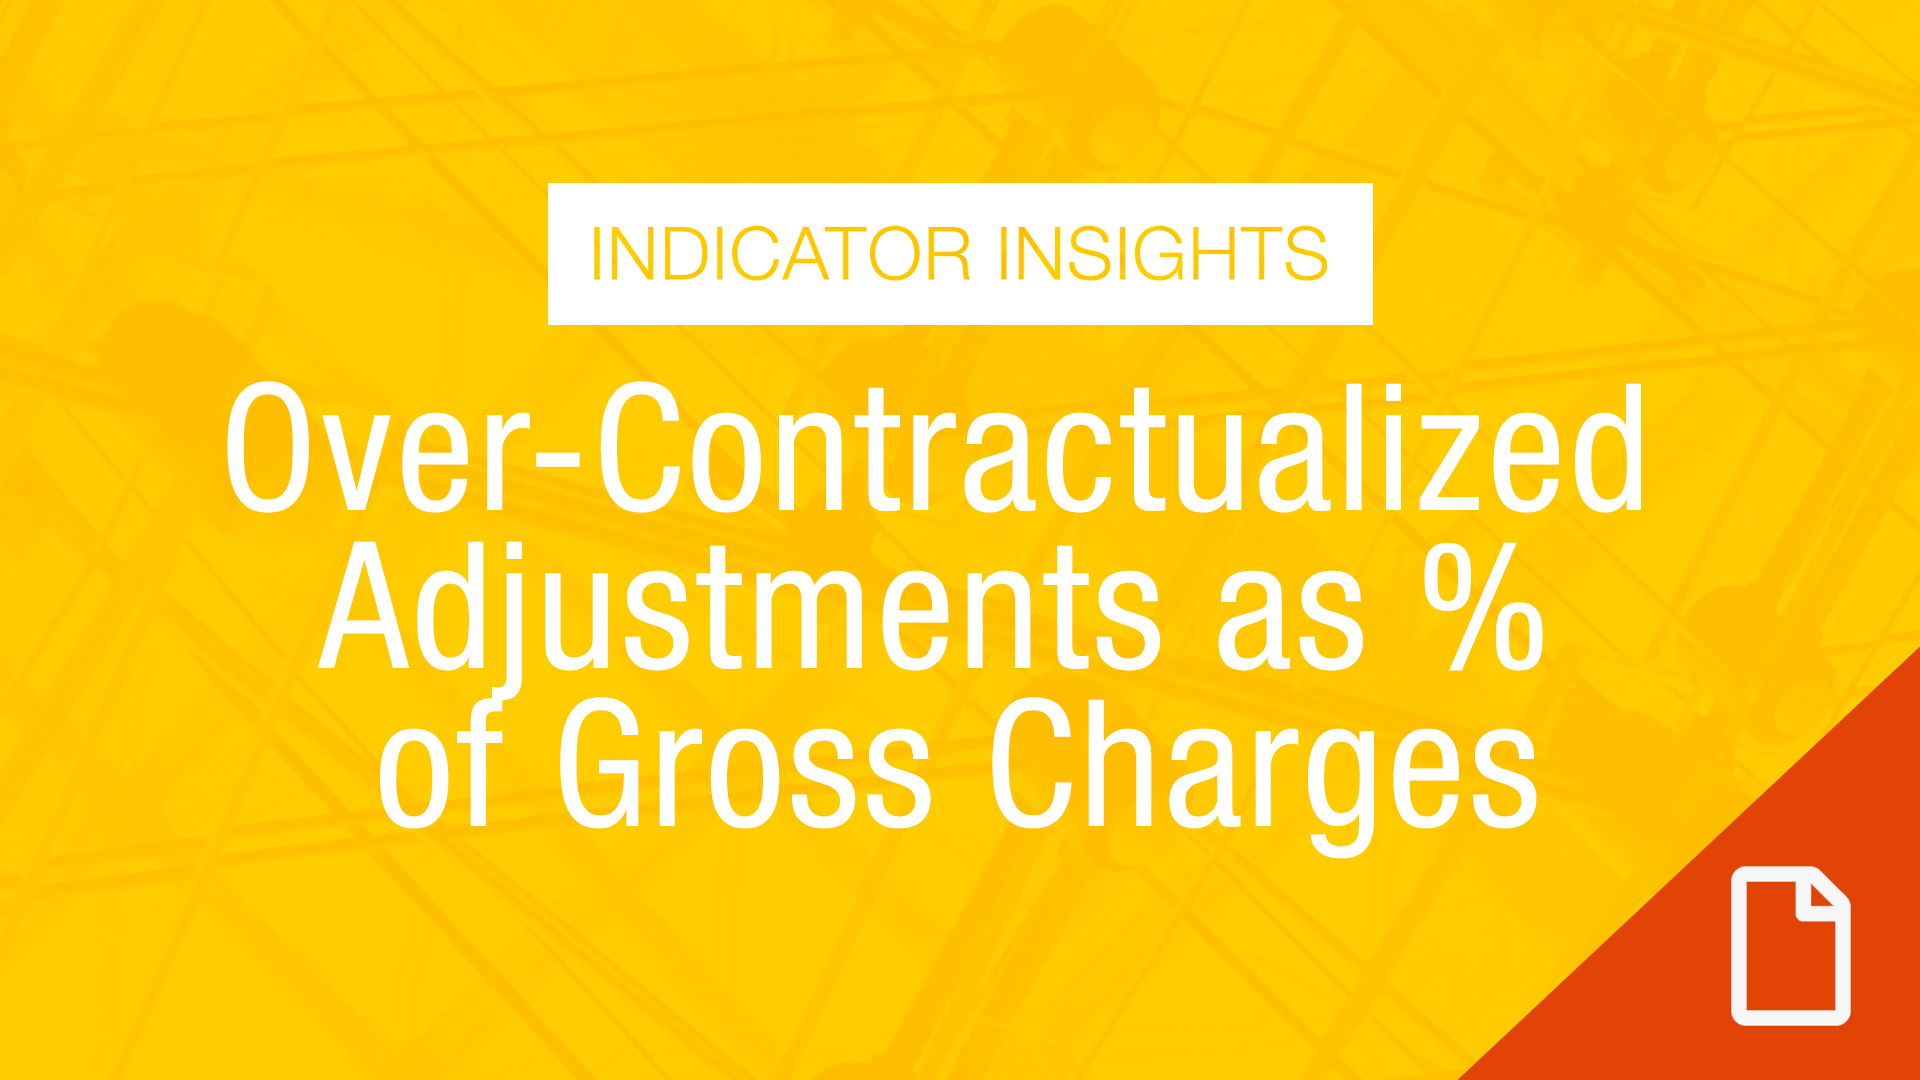 Thumbnail Indicator Insights Overcontractualization